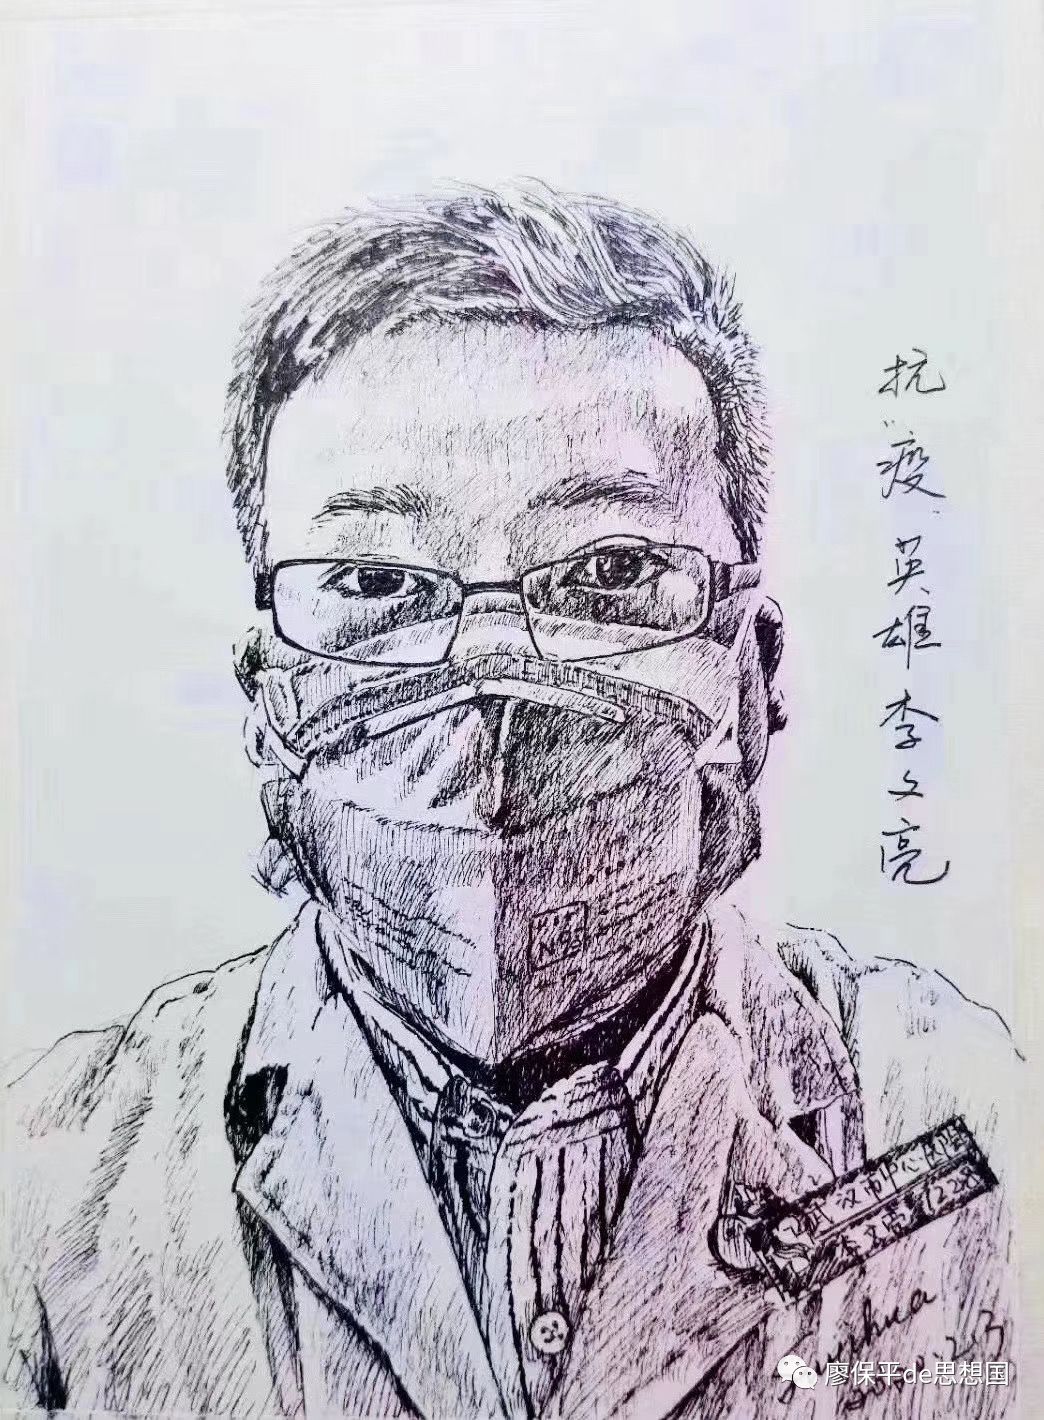 A pen and ink drawing of the young Dr. Li Wenliang, wearing a doctor’s coat, glasses, an N95 face mask, and a name tag identifying him as a doctor at Wuhan Central Hospital.